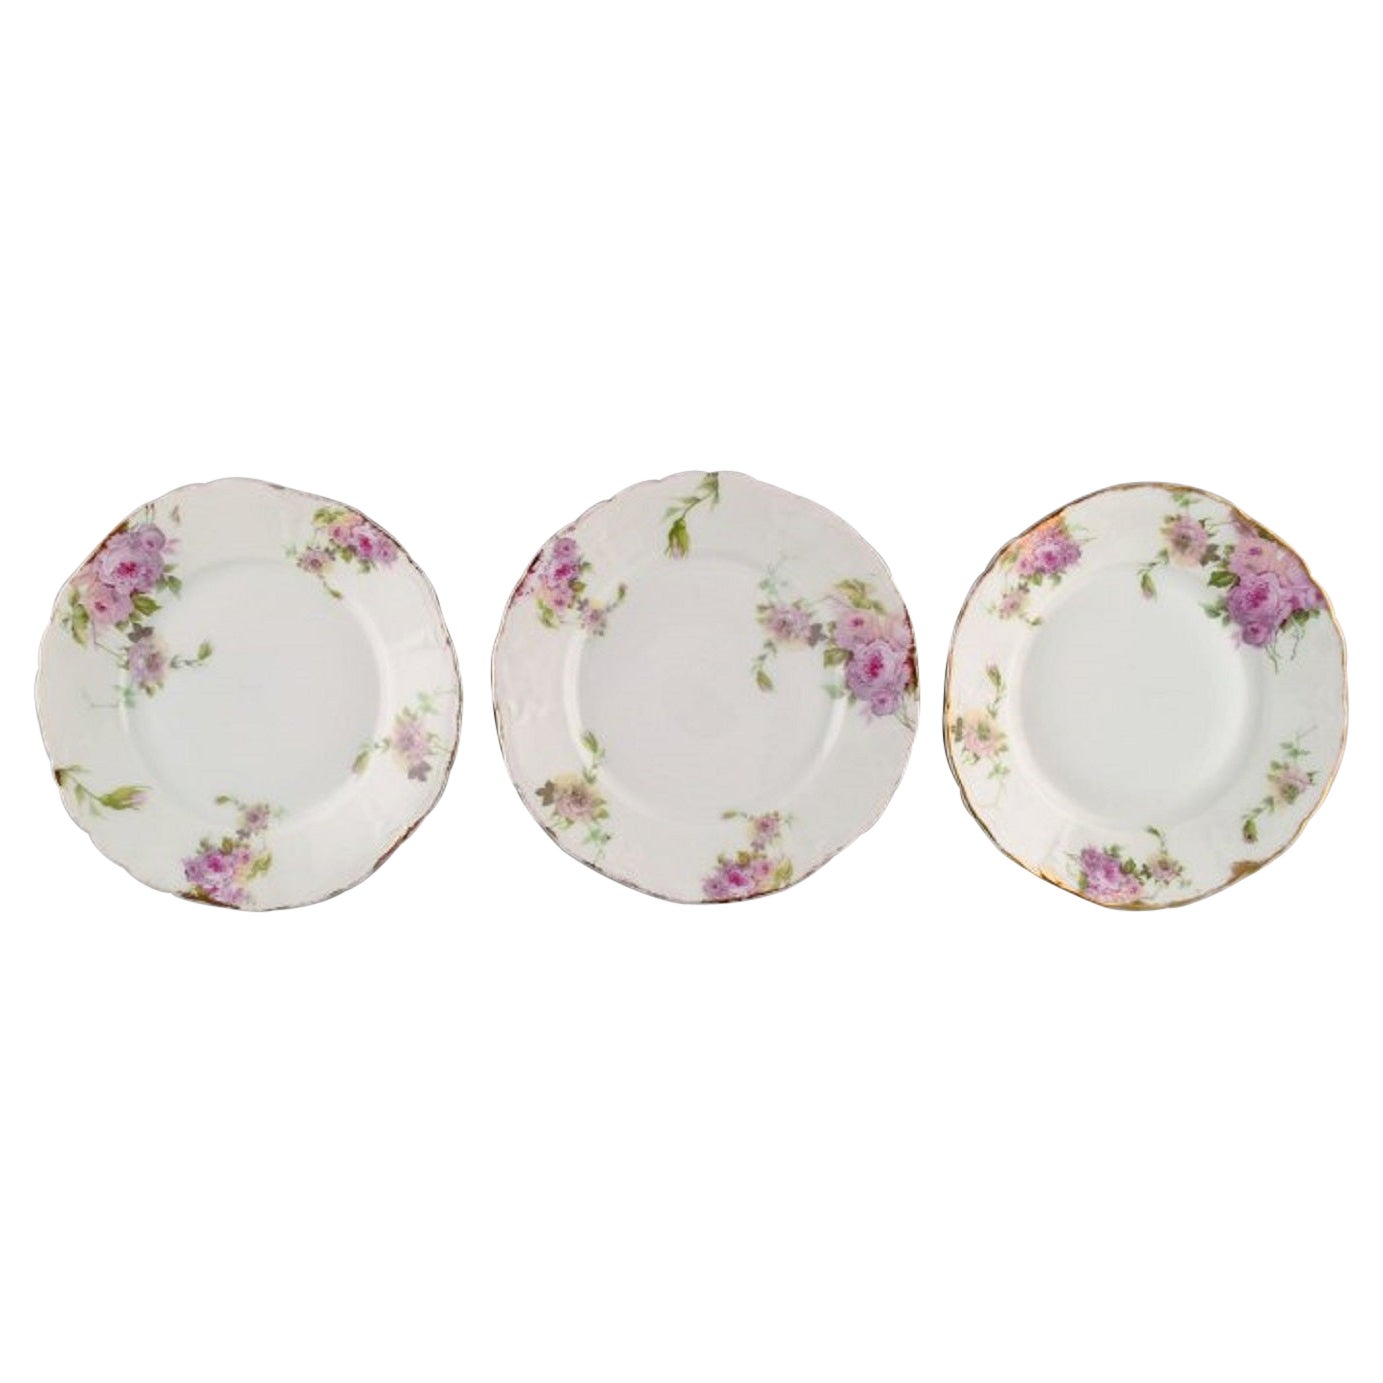 Rosenthal, Germany, Three Iris Plates in Hand-Painted Porcelain with Flowers